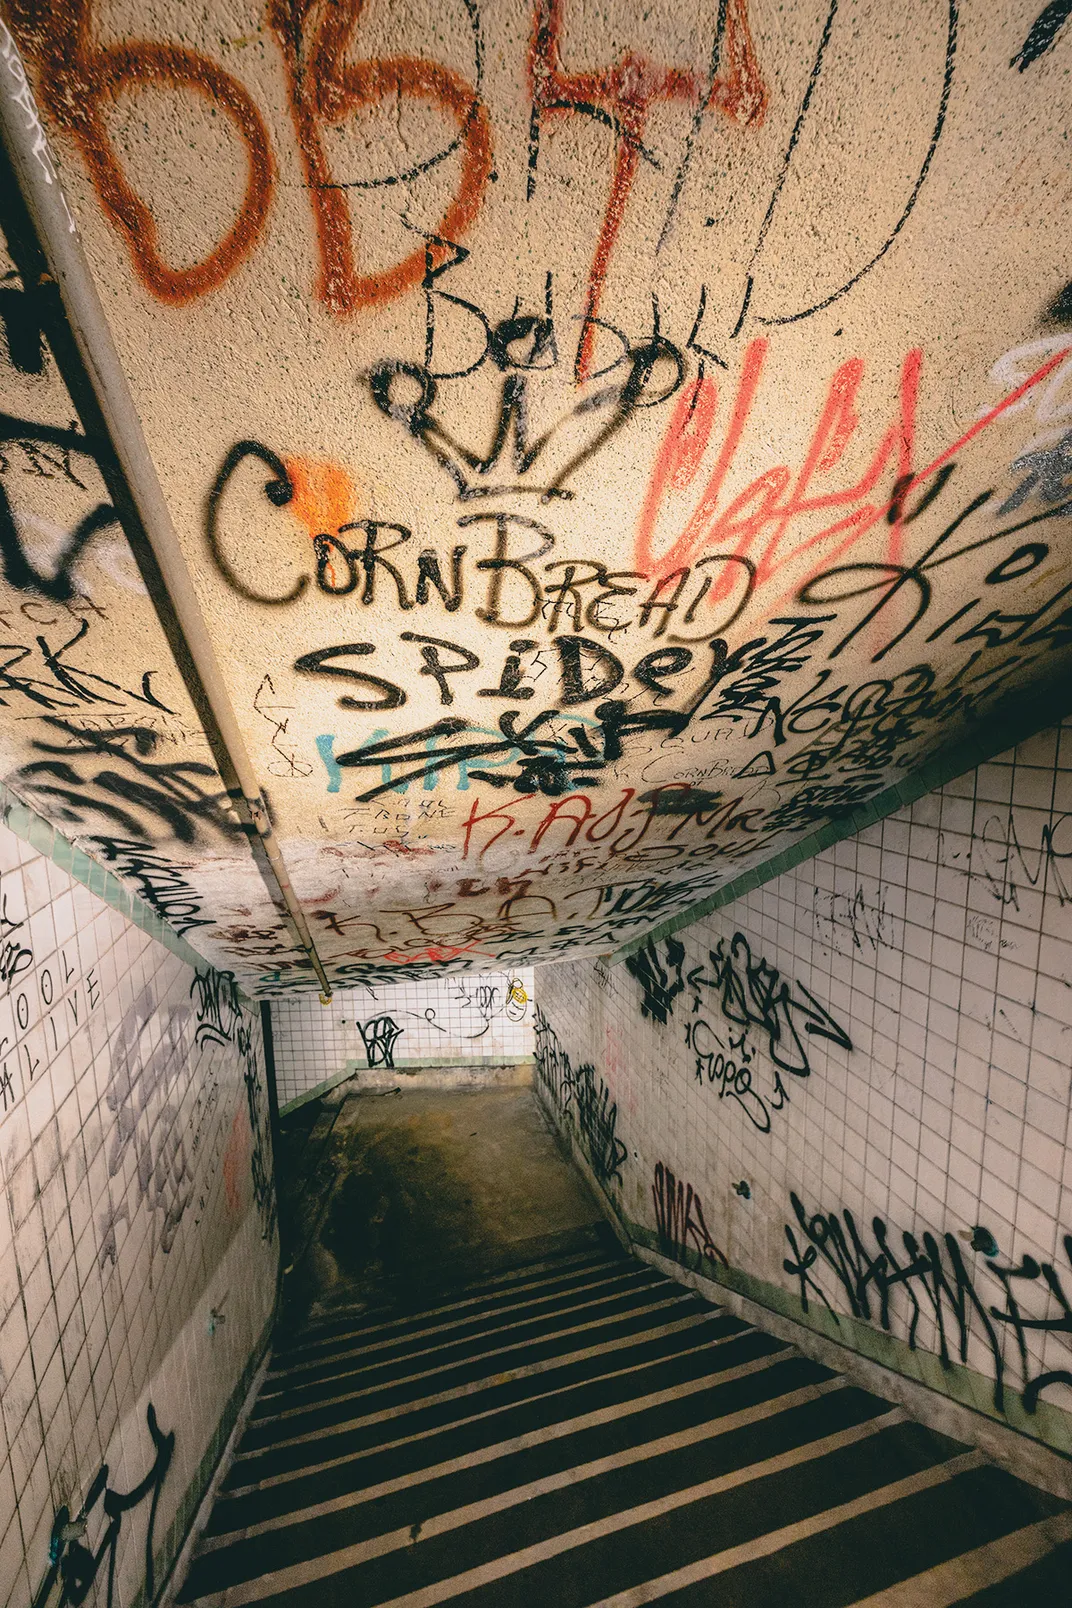 graffiti art shown in an abandoned stairway